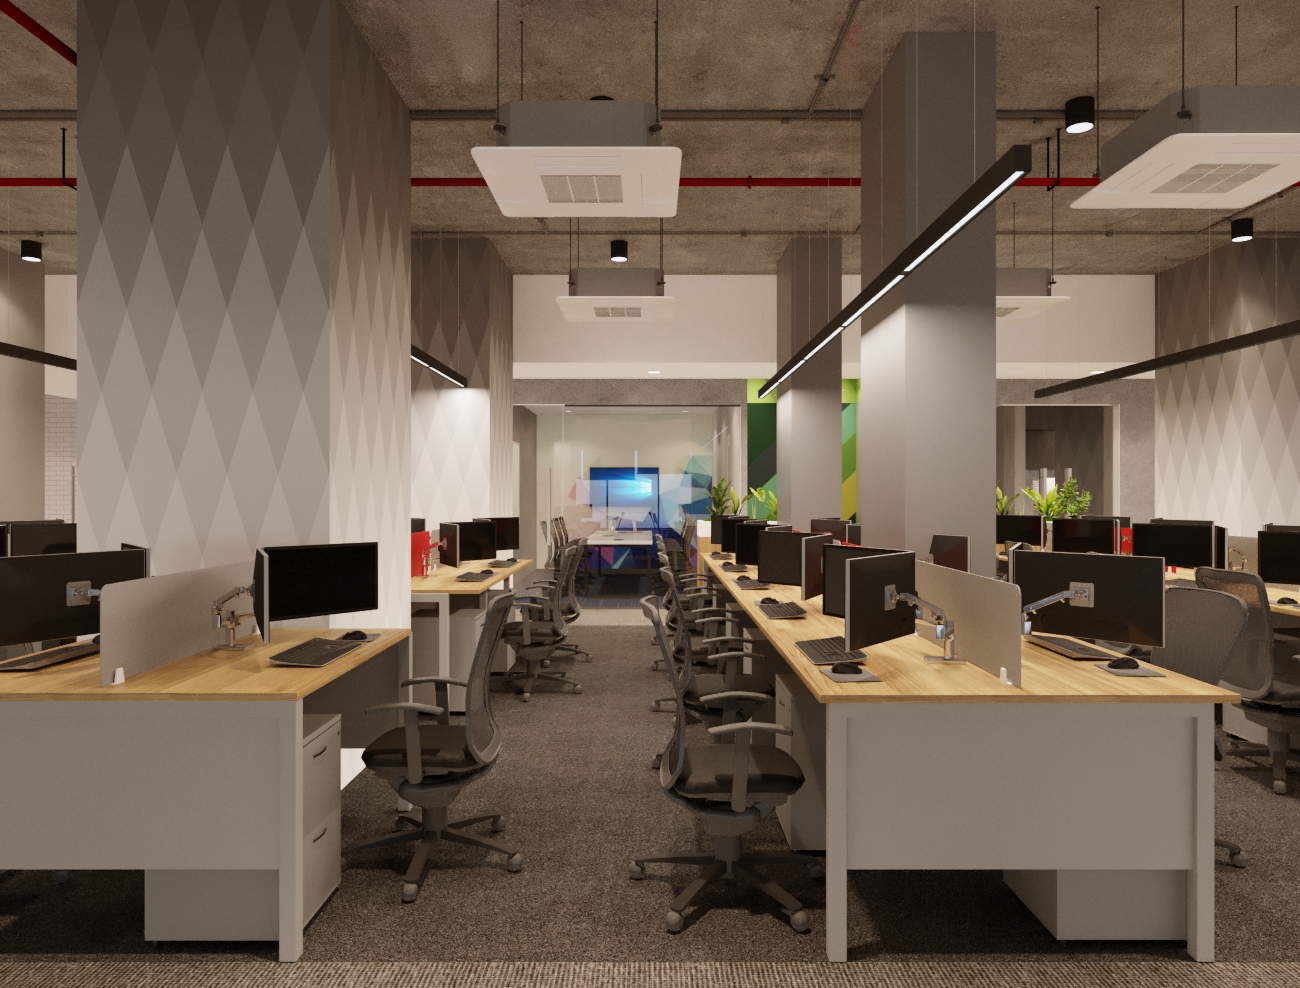 Sustainable Materials & Functional Spaces | Commercial Interior Design